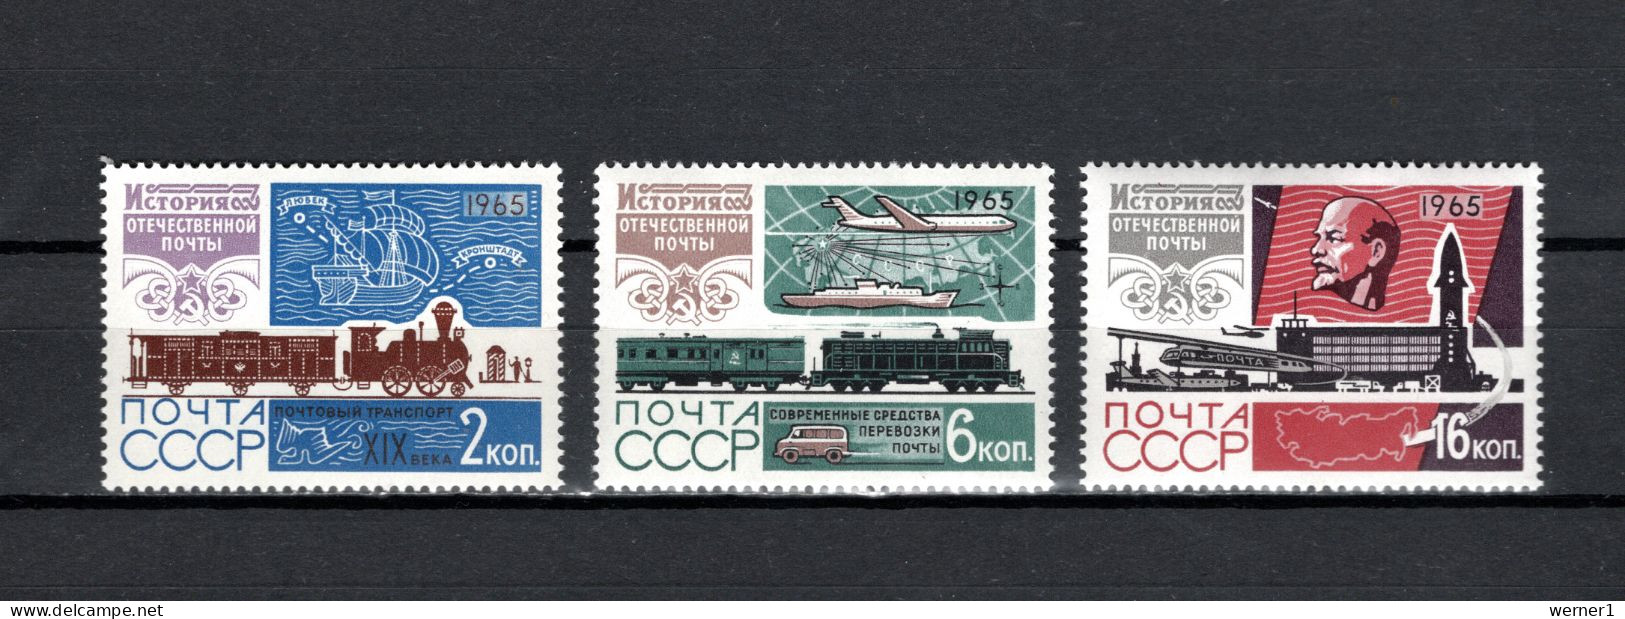 USSR Russia 1965 Space, Postal History Set Of 3 MNH - Russia & USSR